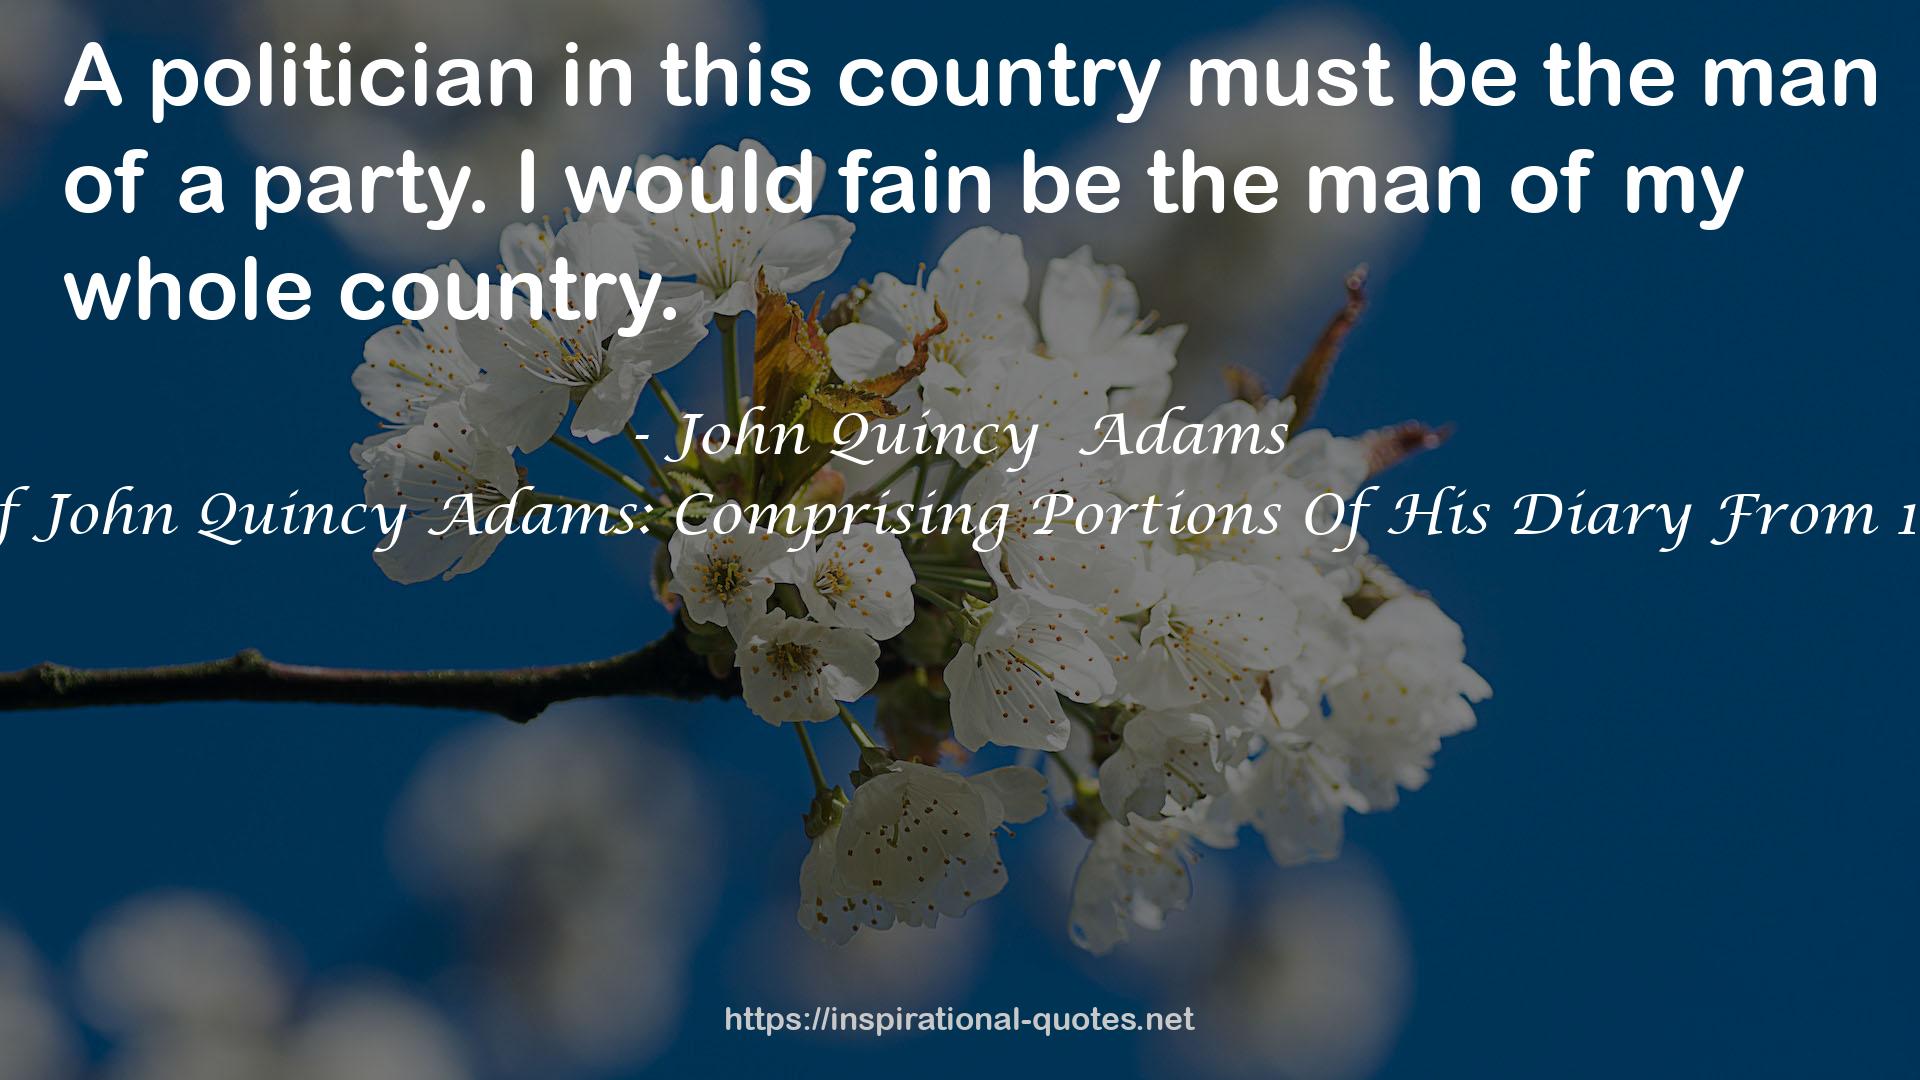 Memoirs Of John Quincy Adams: Comprising Portions Of His Diary From 1795 To 1848 QUOTES